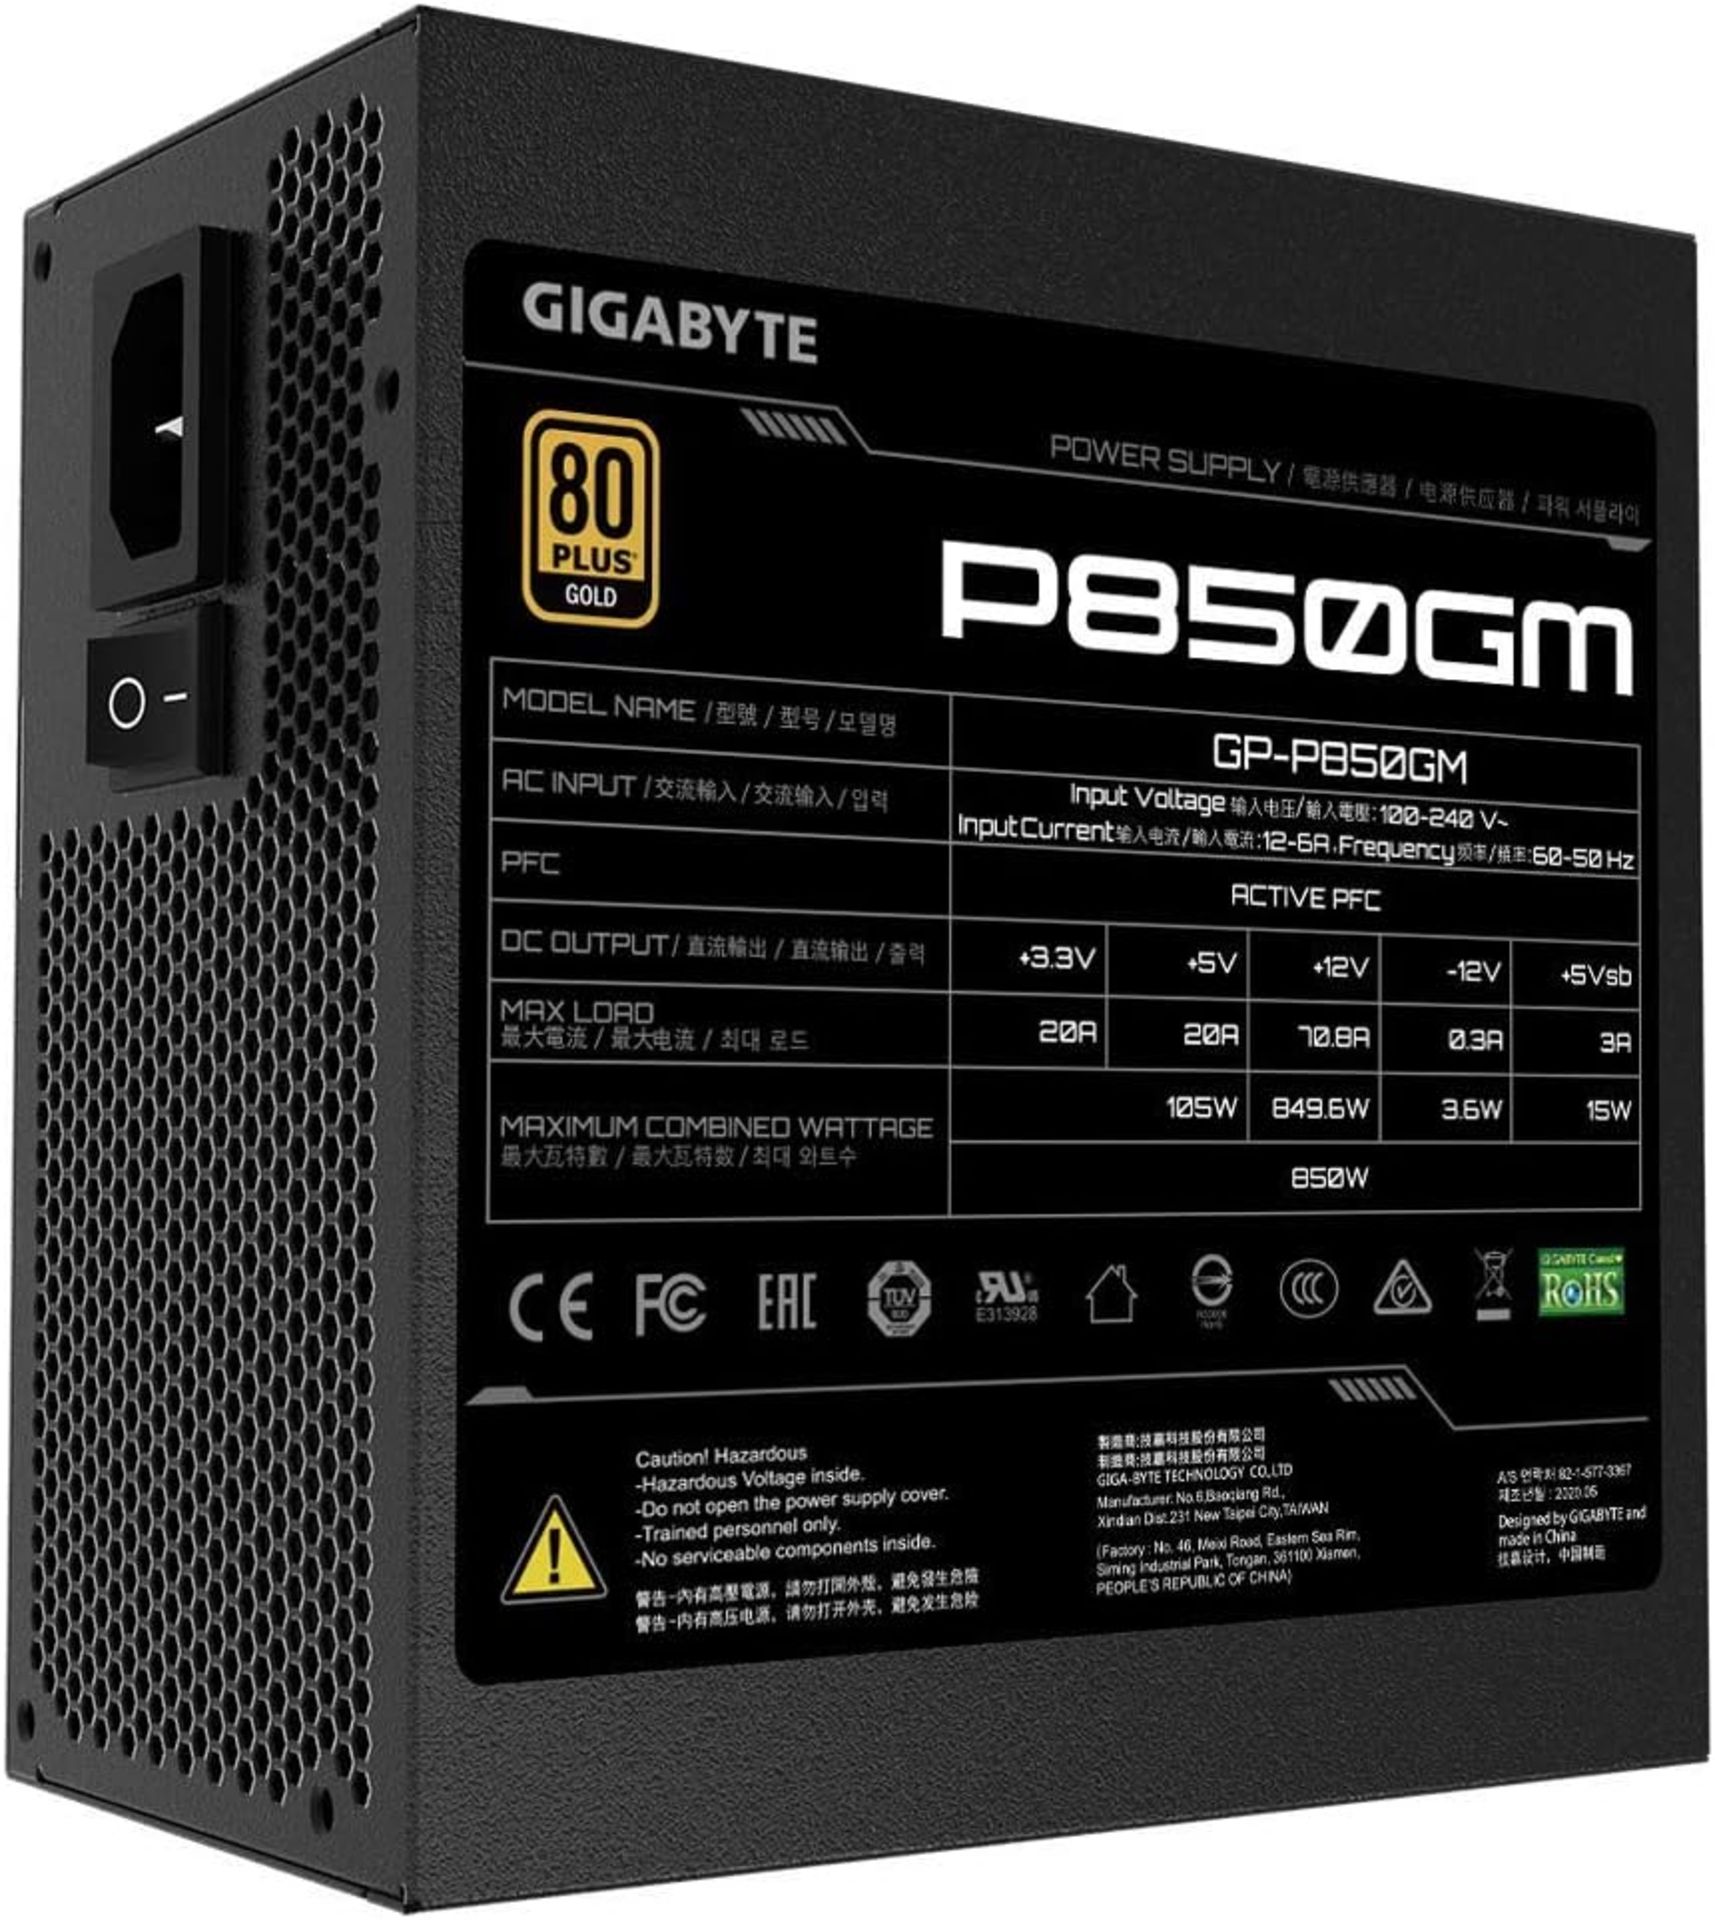 BRAND NEW FACTORY SEALED GIGABYTE P850GM V2 80 Plus Gold Certified PSU. RRP £99.99. FULLY MODULAR - Image 6 of 7